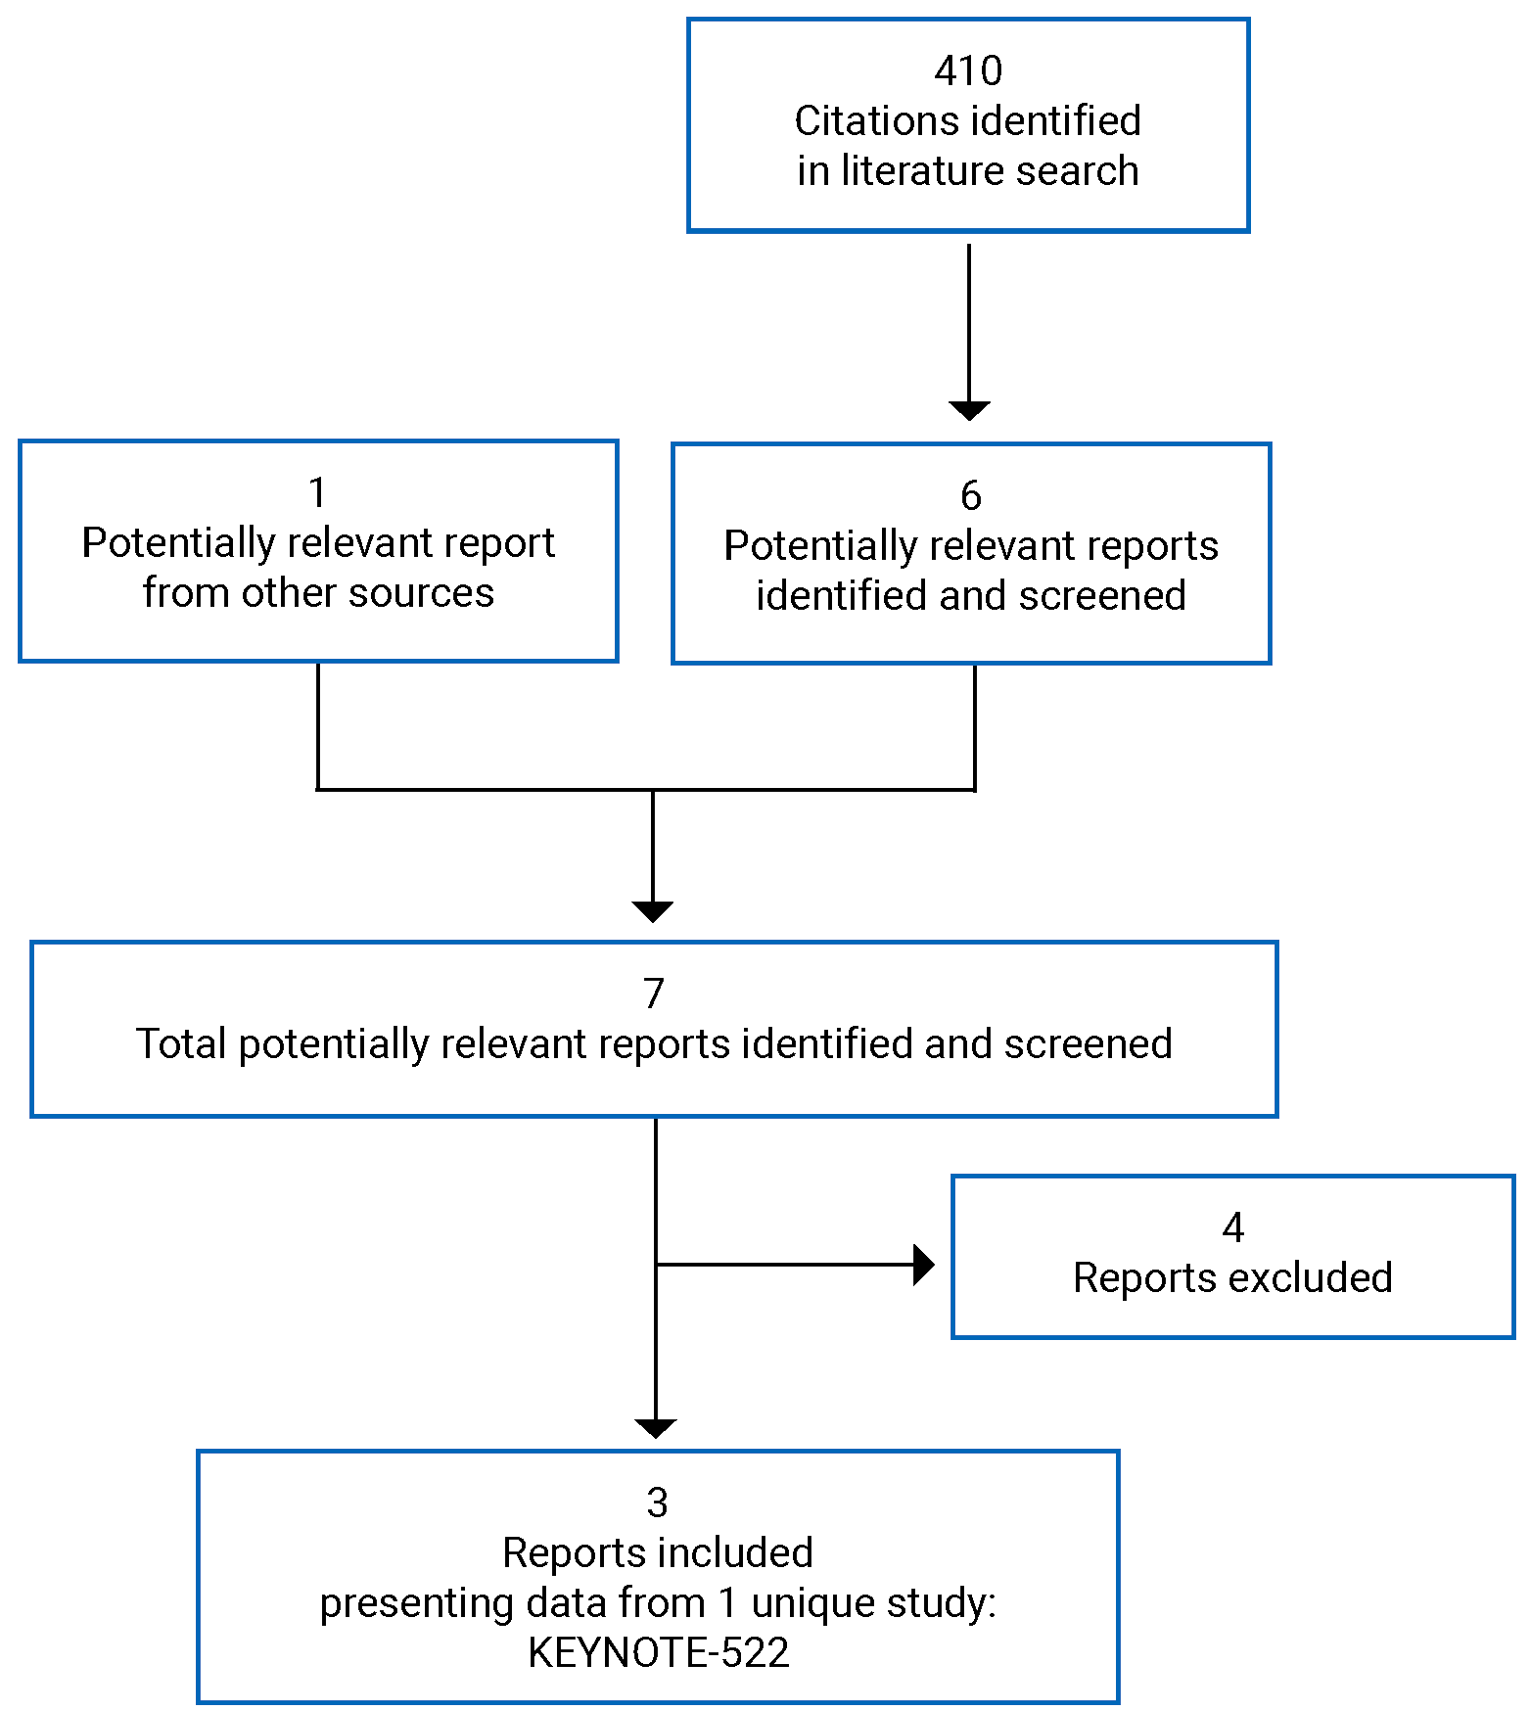 Of the 410 citations identified in the literature search, 6 were potentially relevant. An additional report from the grey literature was potentially relevant. After full-text reports were reviewed, 3 reports representing 1 unique study were included in the systematic review.